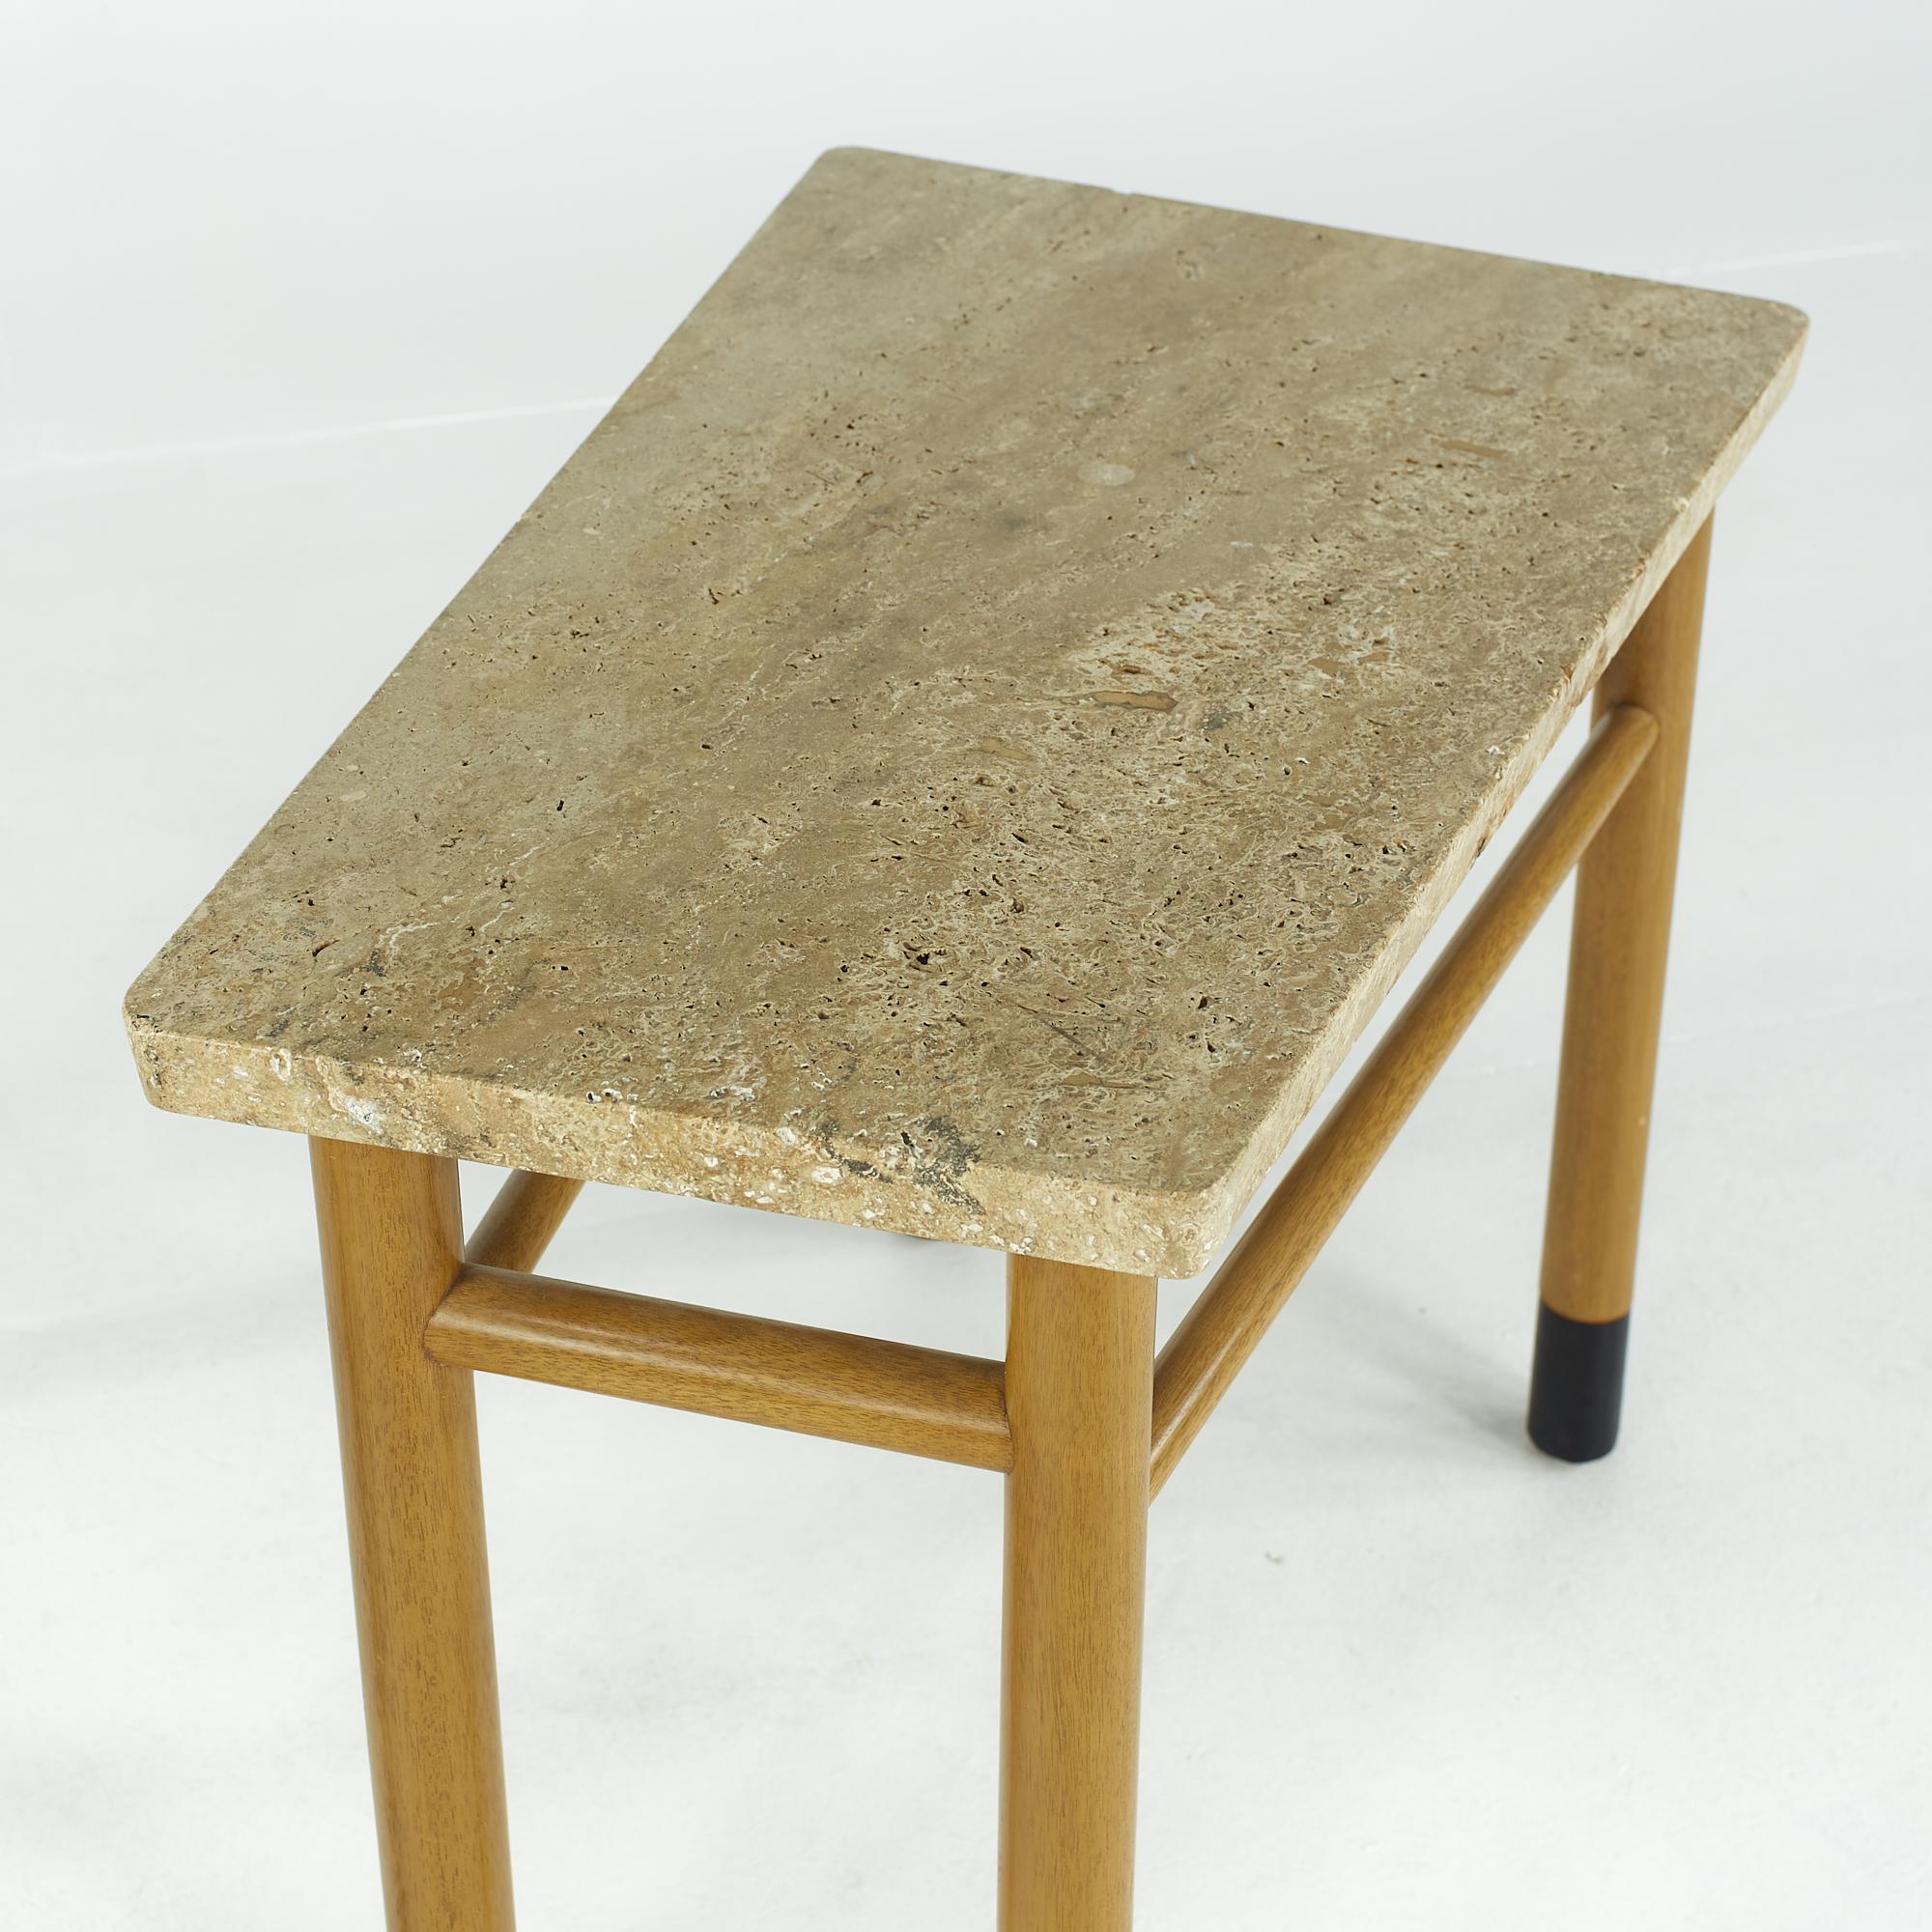 Edward Wormley for Dunbar Midcentury Travertine Wedge Tables, Pair For Sale 7